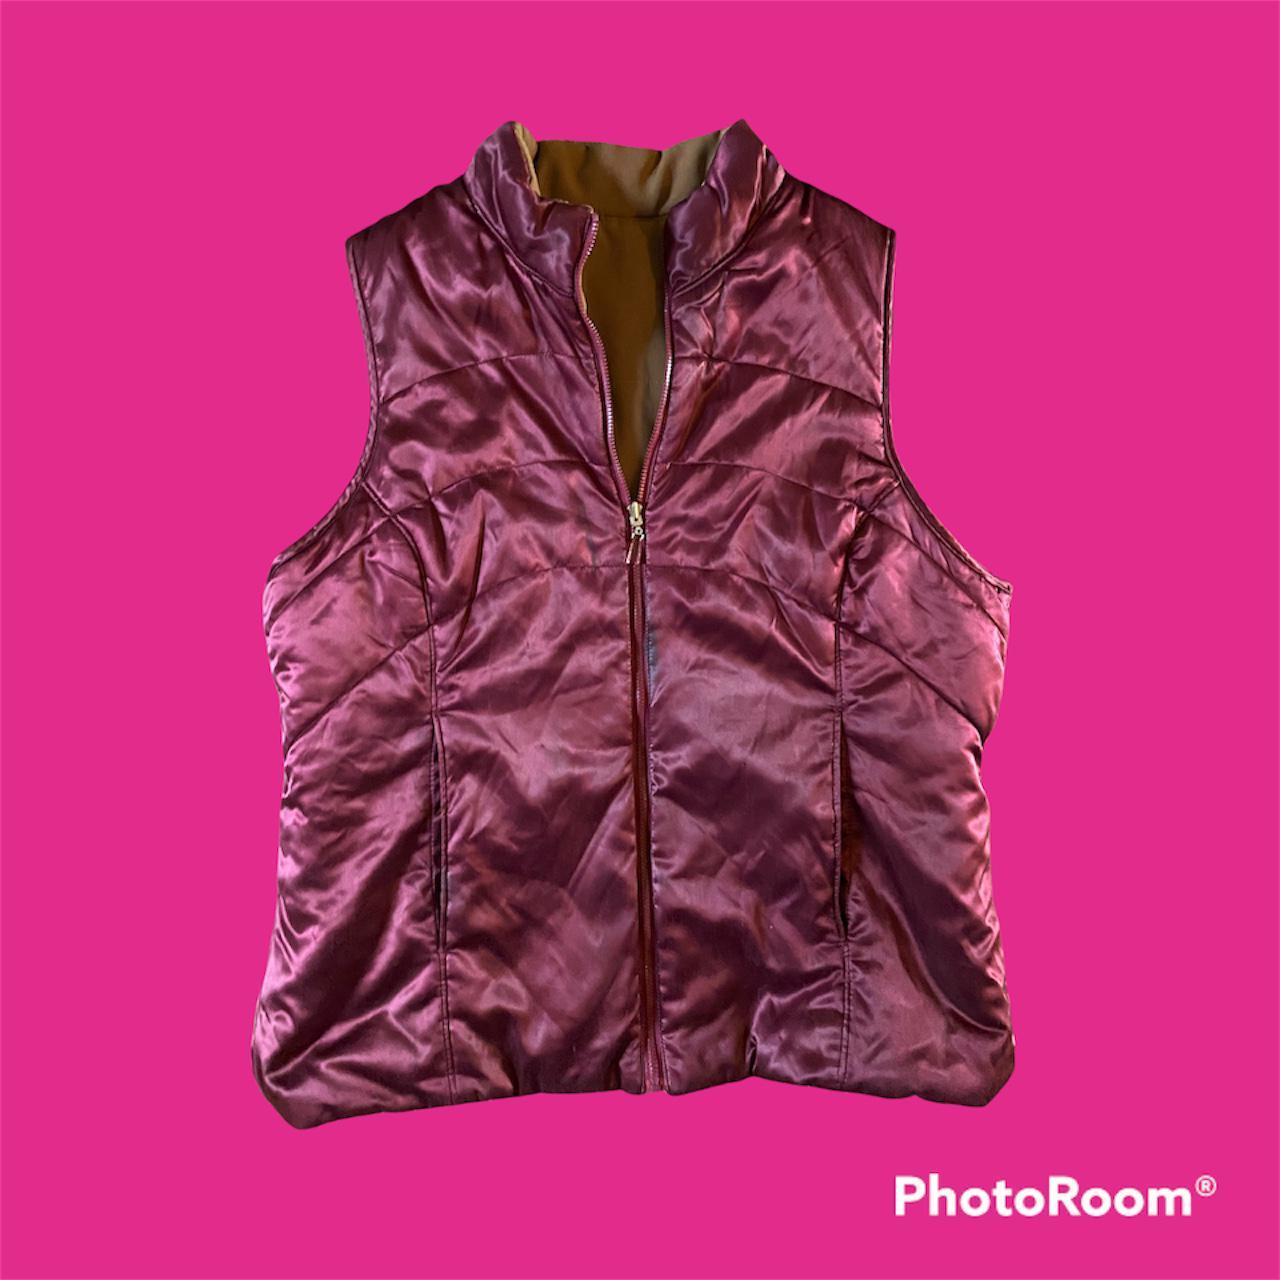 Product Image 1 - Burgundy puffer vest!❄️ 
Pit to